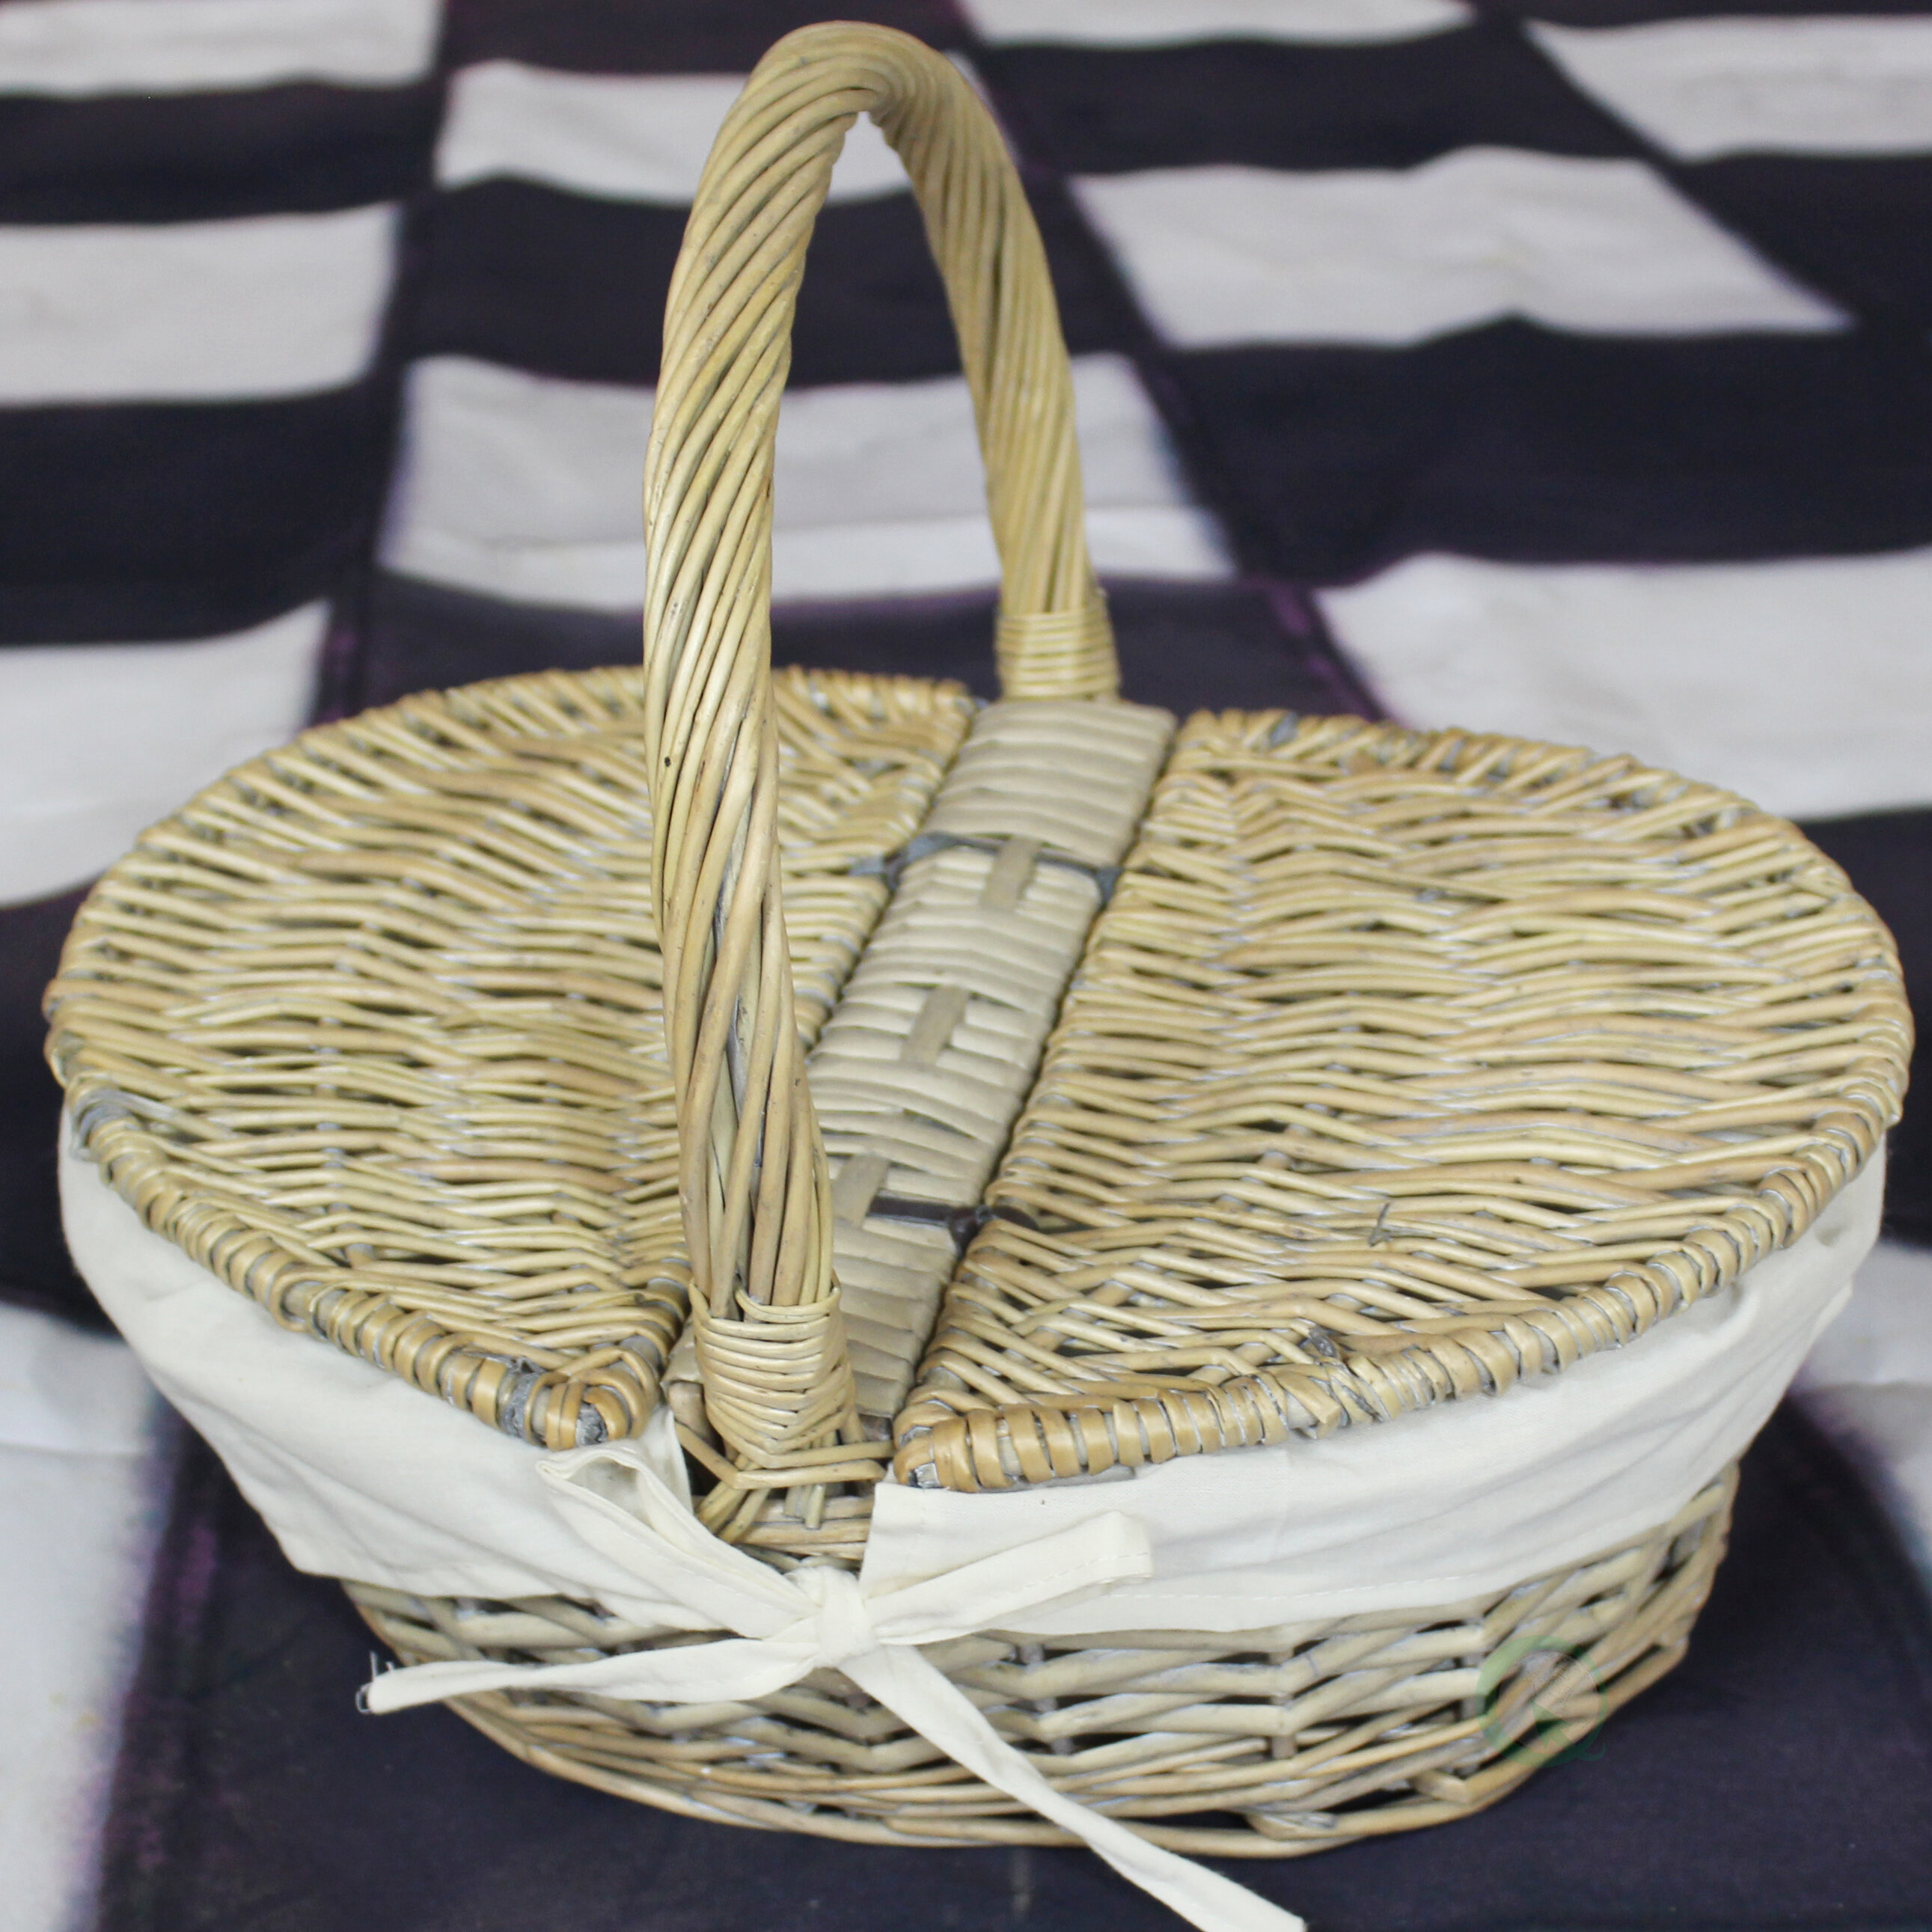 Oval Natural Wicker Picnic Shopping Basket With Handle New